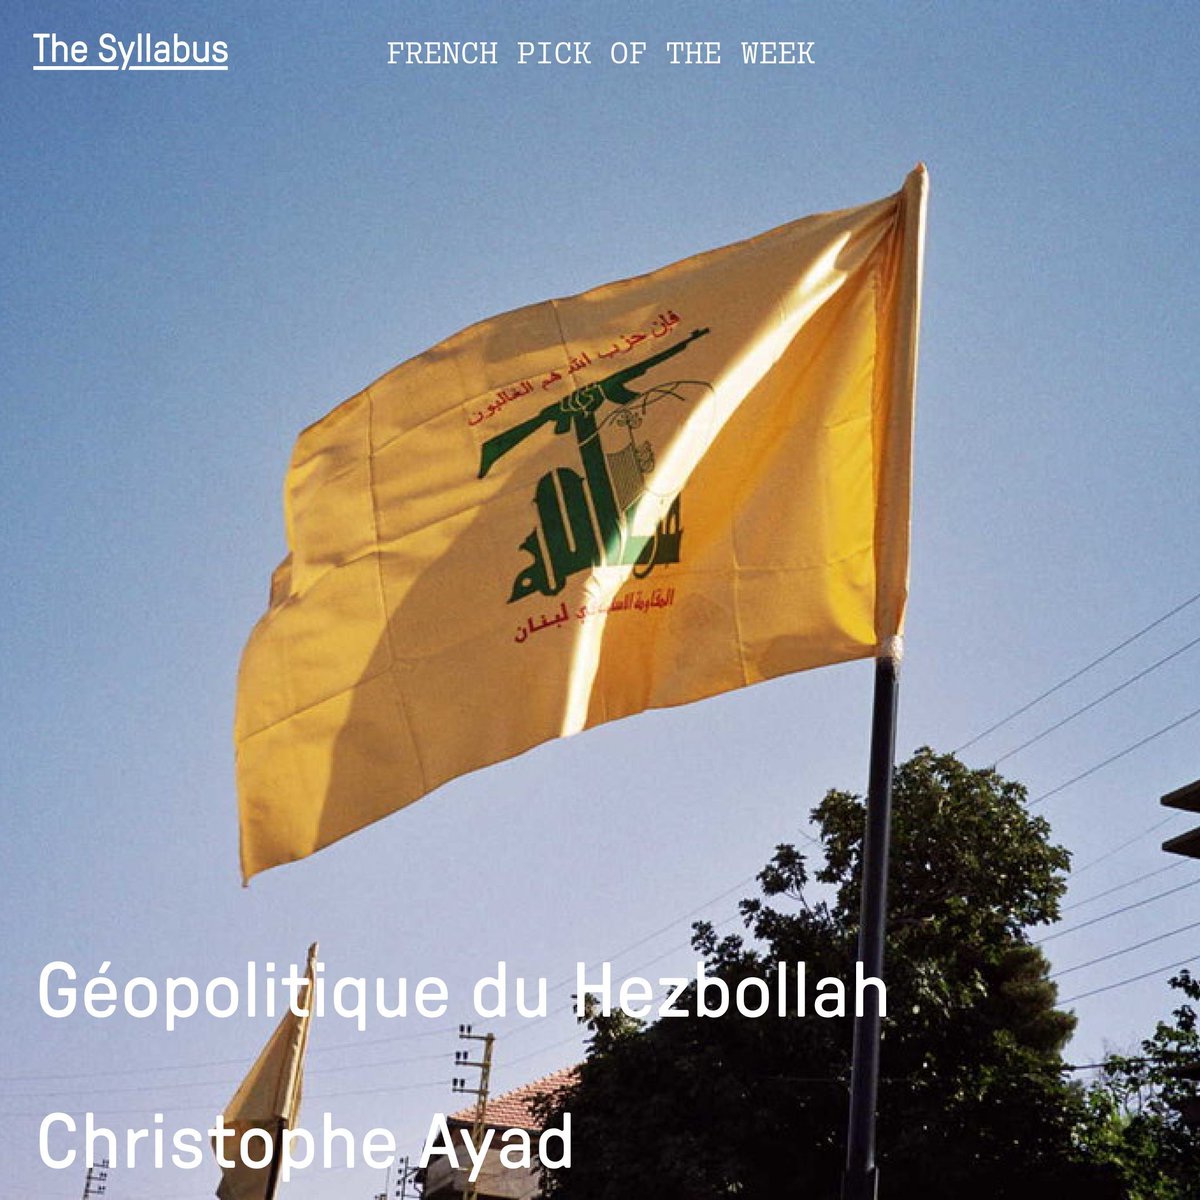 Hezbollah is an entity that is at once a political party, an armed militia, and a terrorist movement. Our French pick of the week analyzes its evolution from 'a state within the state' to 'a state above the state.' By @ChristopheAyad for @editions_PUF buff.ly/3xkNNzo